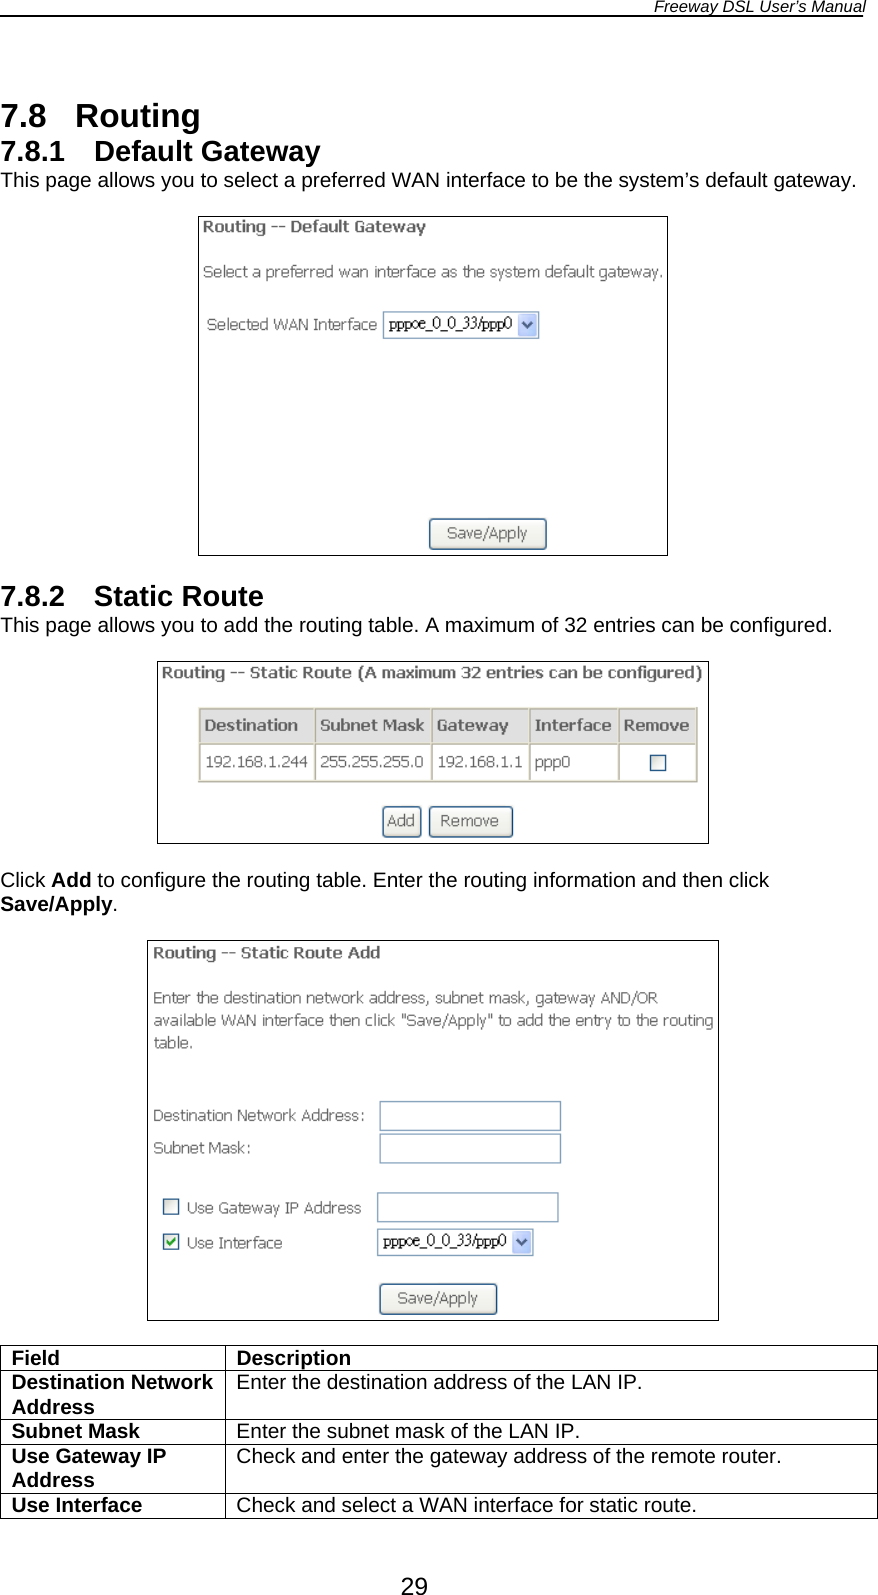 Freeway DSL User’s Manual  29  7.8 Routing 7.8.1 Default Gateway This page allows you to select a preferred WAN interface to be the system’s default gateway.    7.8.2 Static Route This page allows you to add the routing table. A maximum of 32 entries can be configured.    Click Add to configure the routing table. Enter the routing information and then click Save/Apply.    Field Description Destination Network Address  Enter the destination address of the LAN IP. Subnet Mask  Enter the subnet mask of the LAN IP. Use Gateway IP Address  Check and enter the gateway address of the remote router. Use Interface  Check and select a WAN interface for static route. 